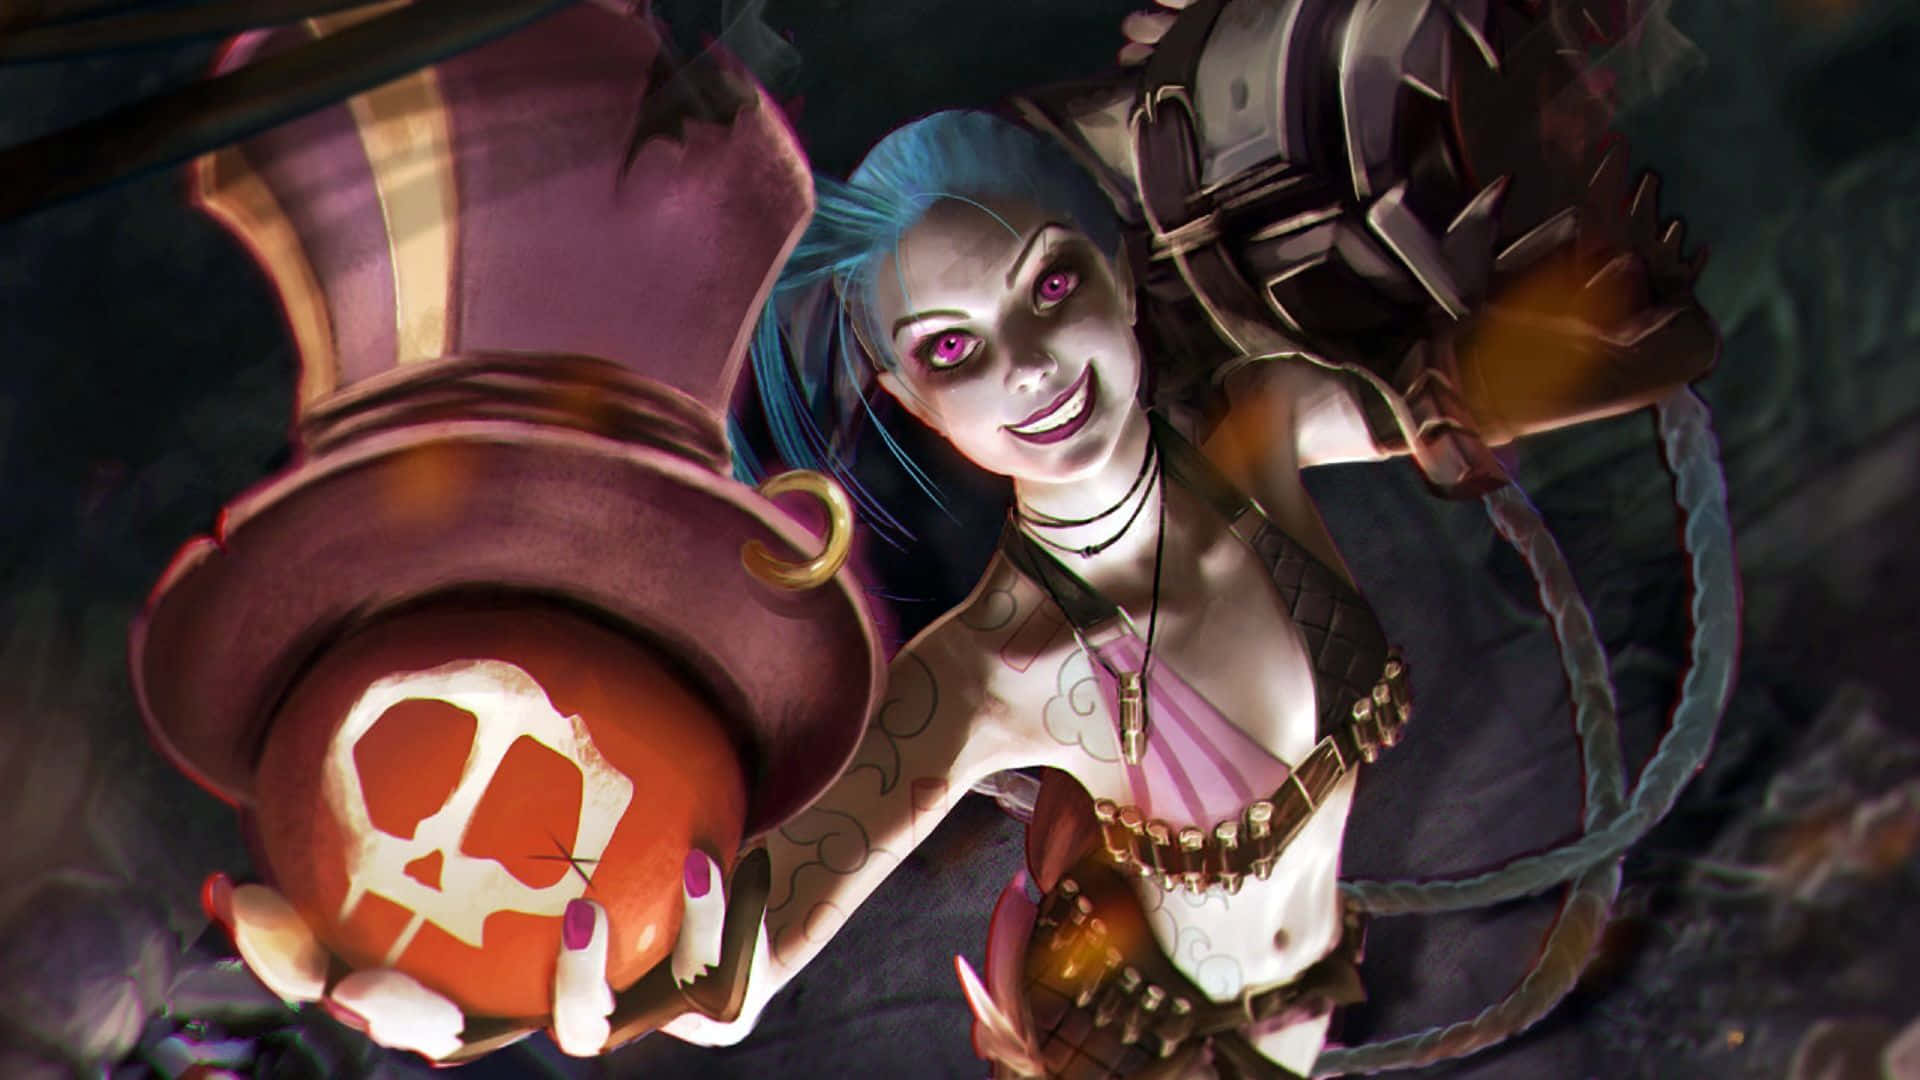 Download Jinx, the Loose Cannon, in action in a high-definition wallpaper